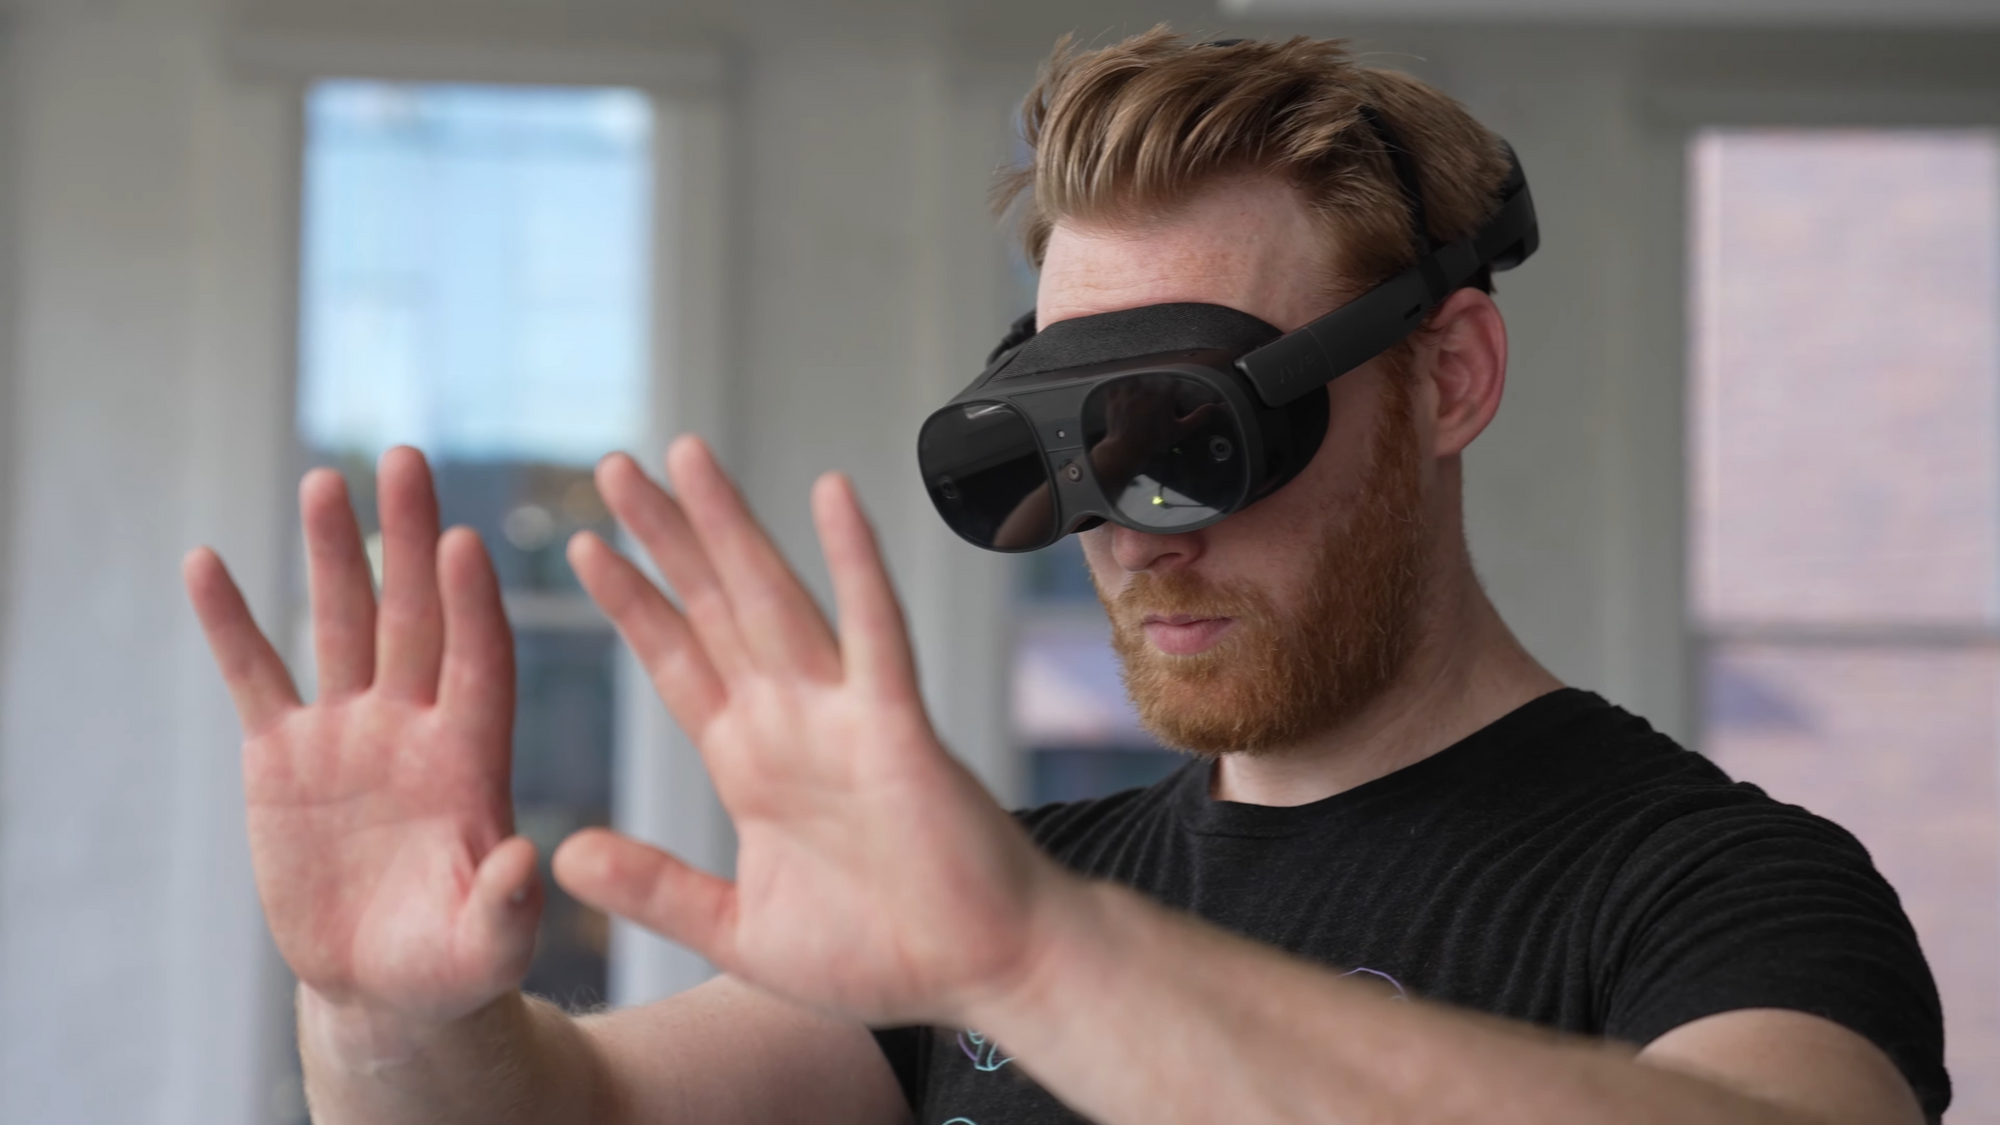 The Vive XR Elite system interface receives direct touch mode